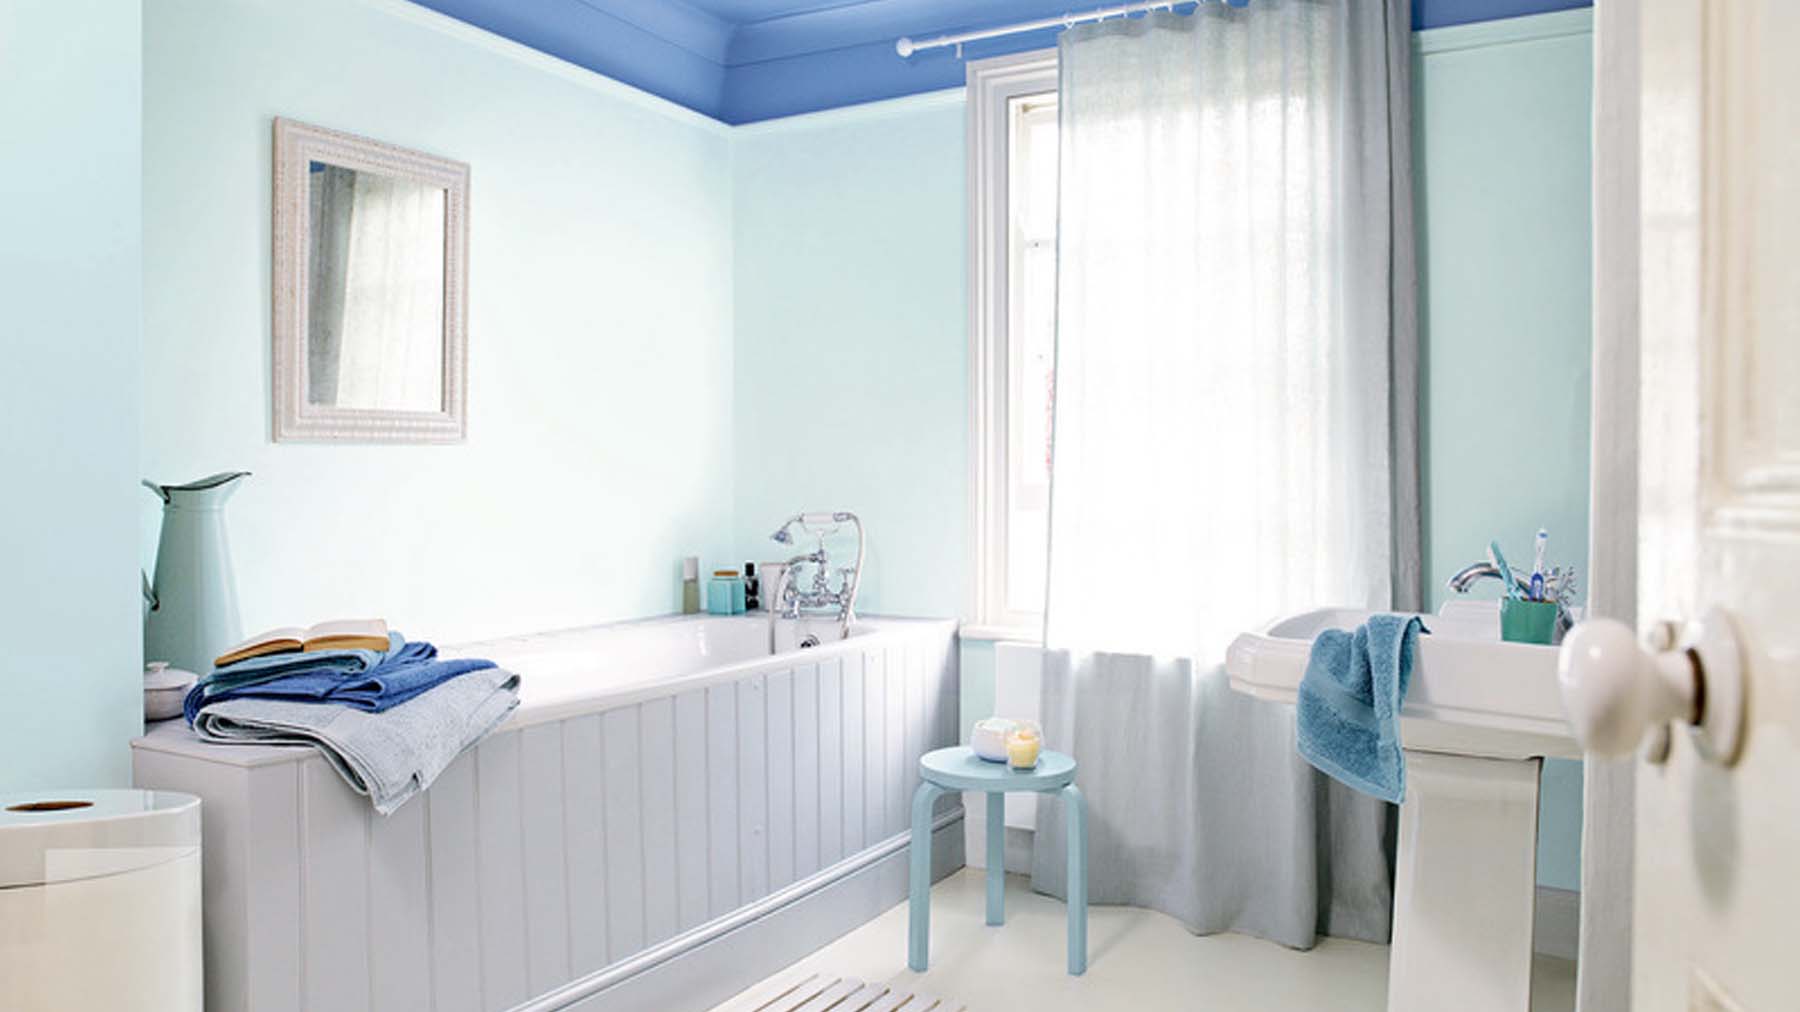 5 Ideas For Upgrading Your Bathroom on a Budget | Dulux